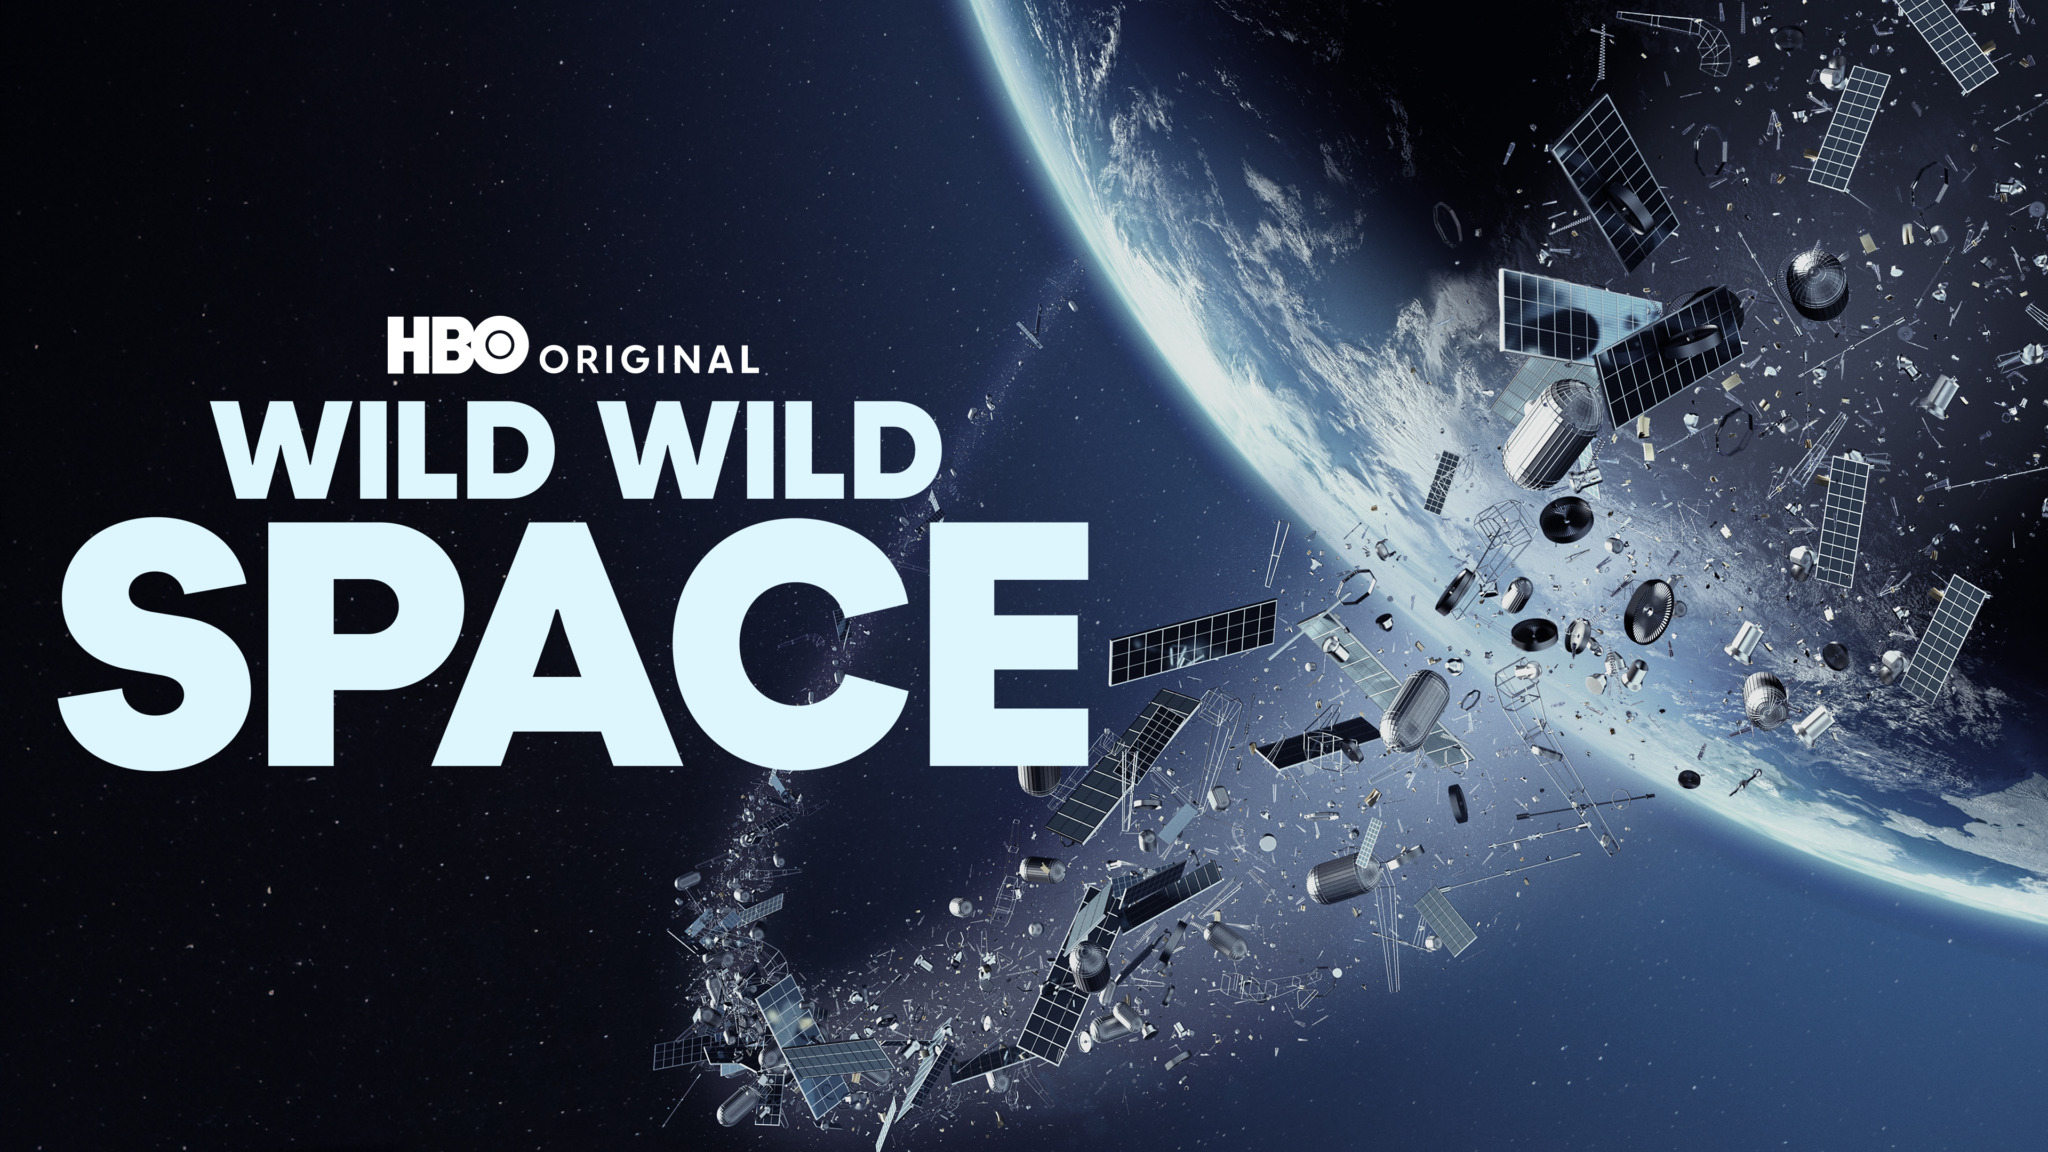 HBO releases a movie about “Wild Wild Space.” Not fantastic